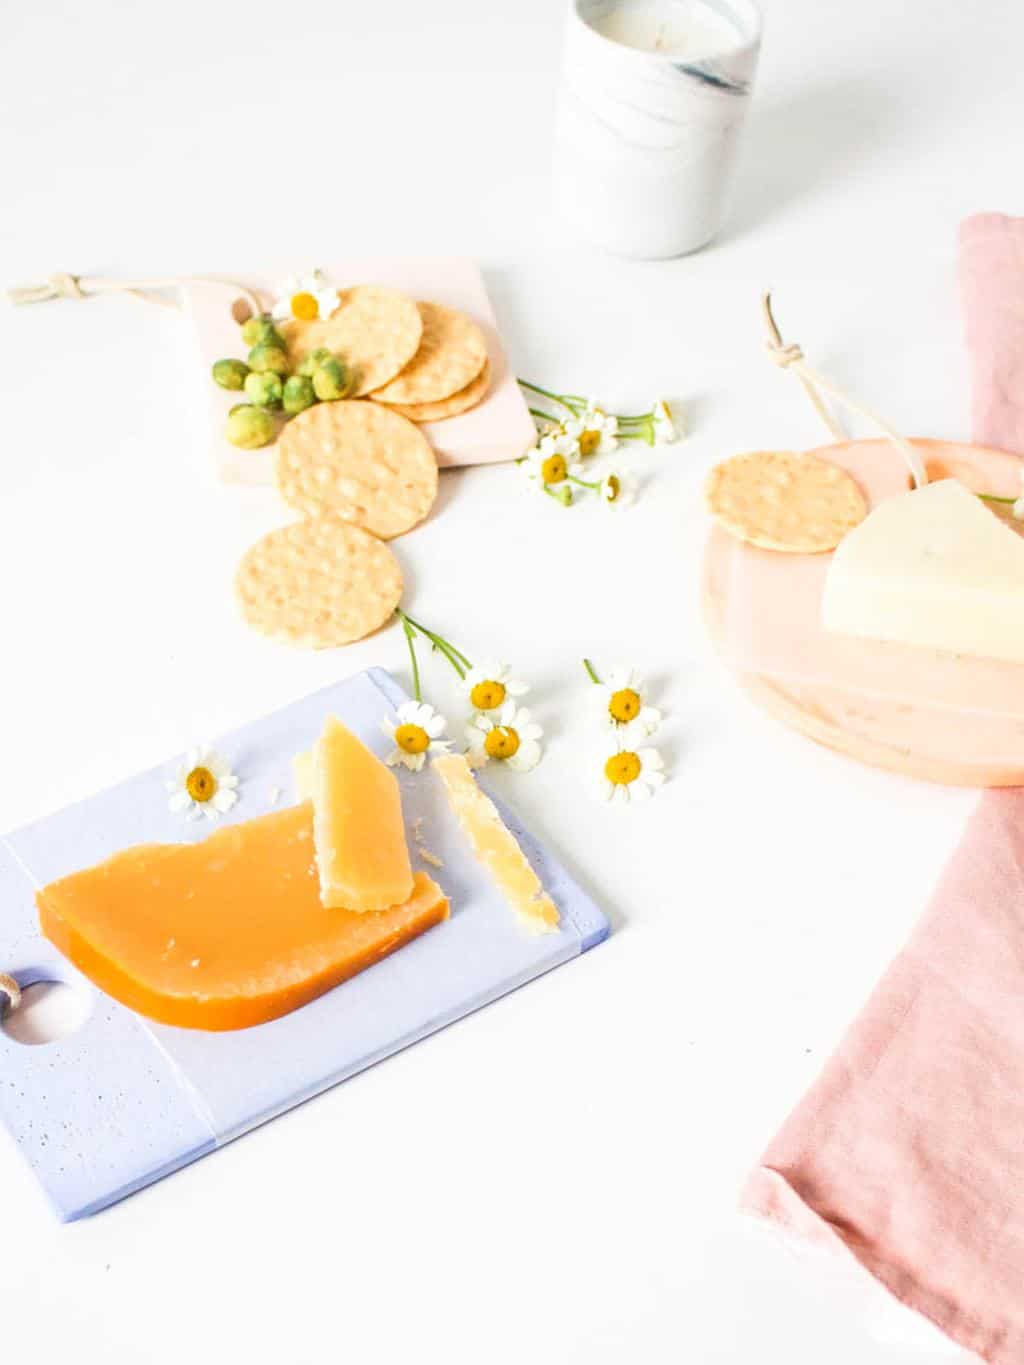 DIY Mini Colorful Cheese Boards by Ashley Rose of Sugar & Cloth, a top lifestyle blog in Houston, Texas